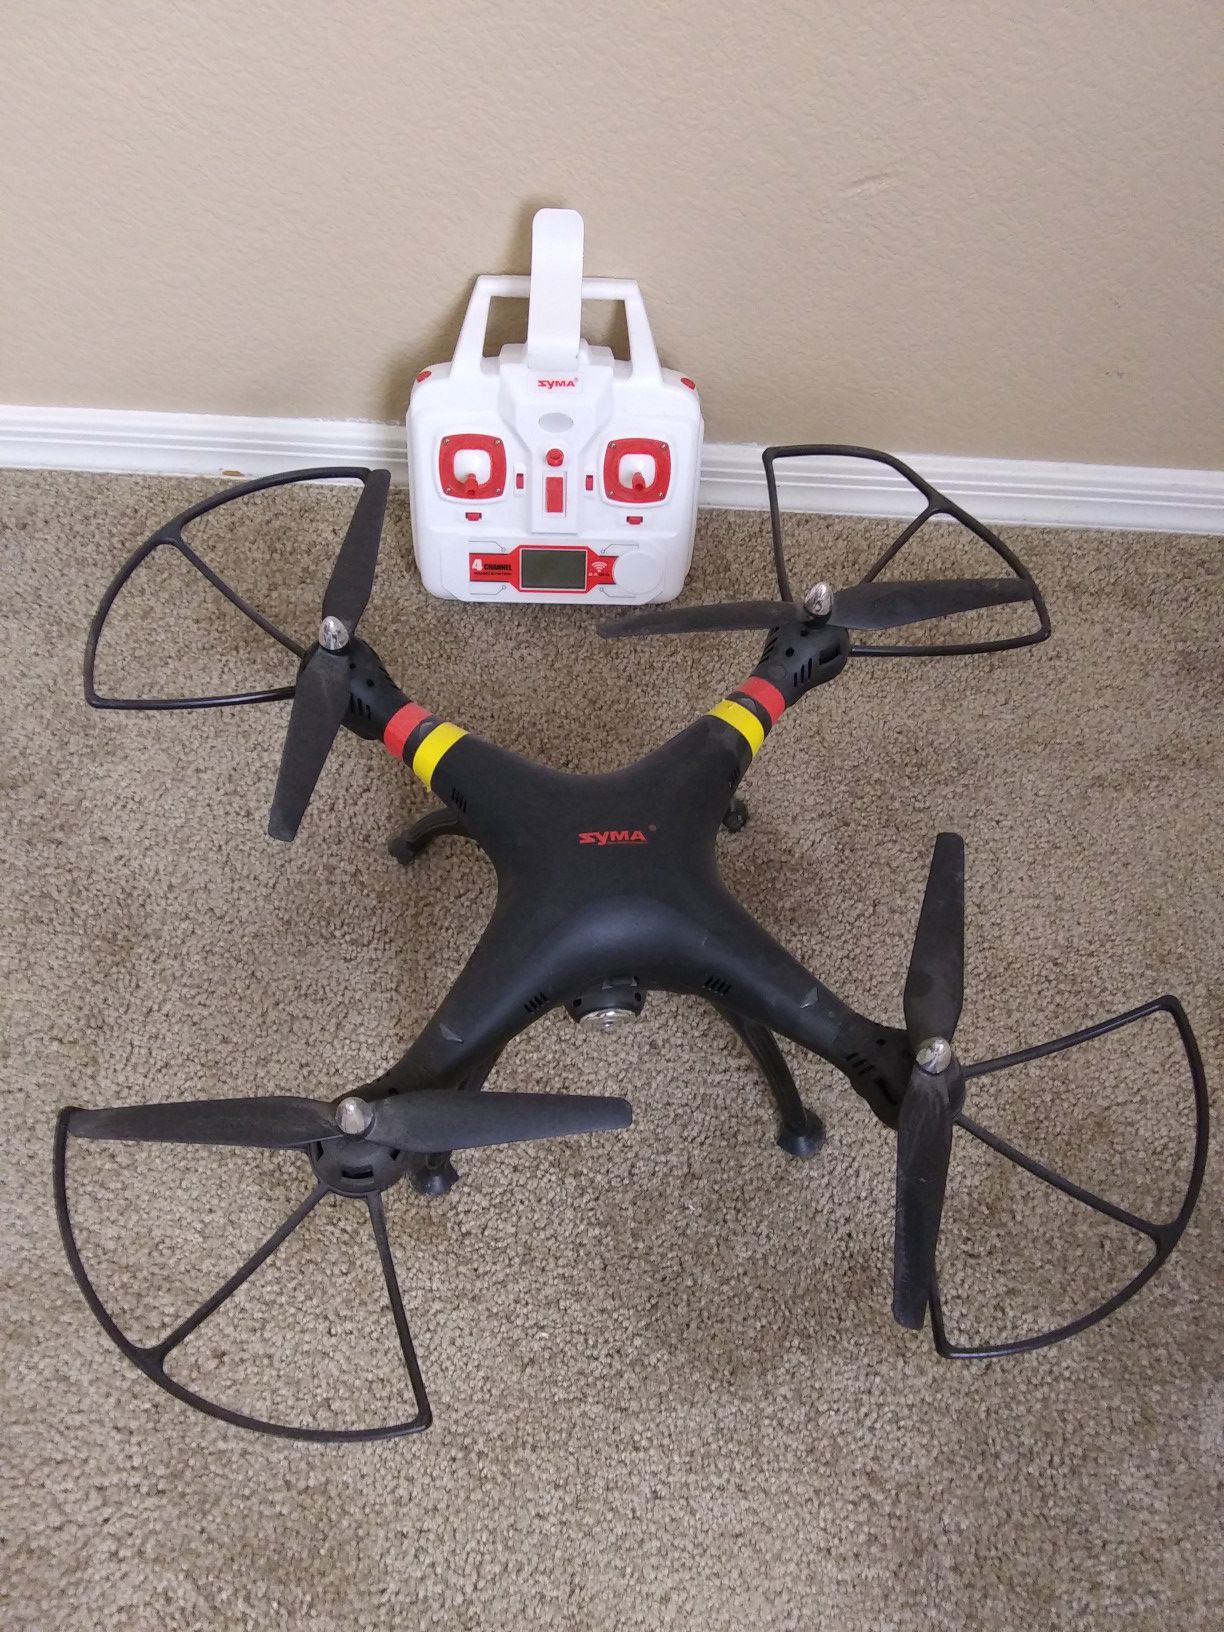 Drone with remote